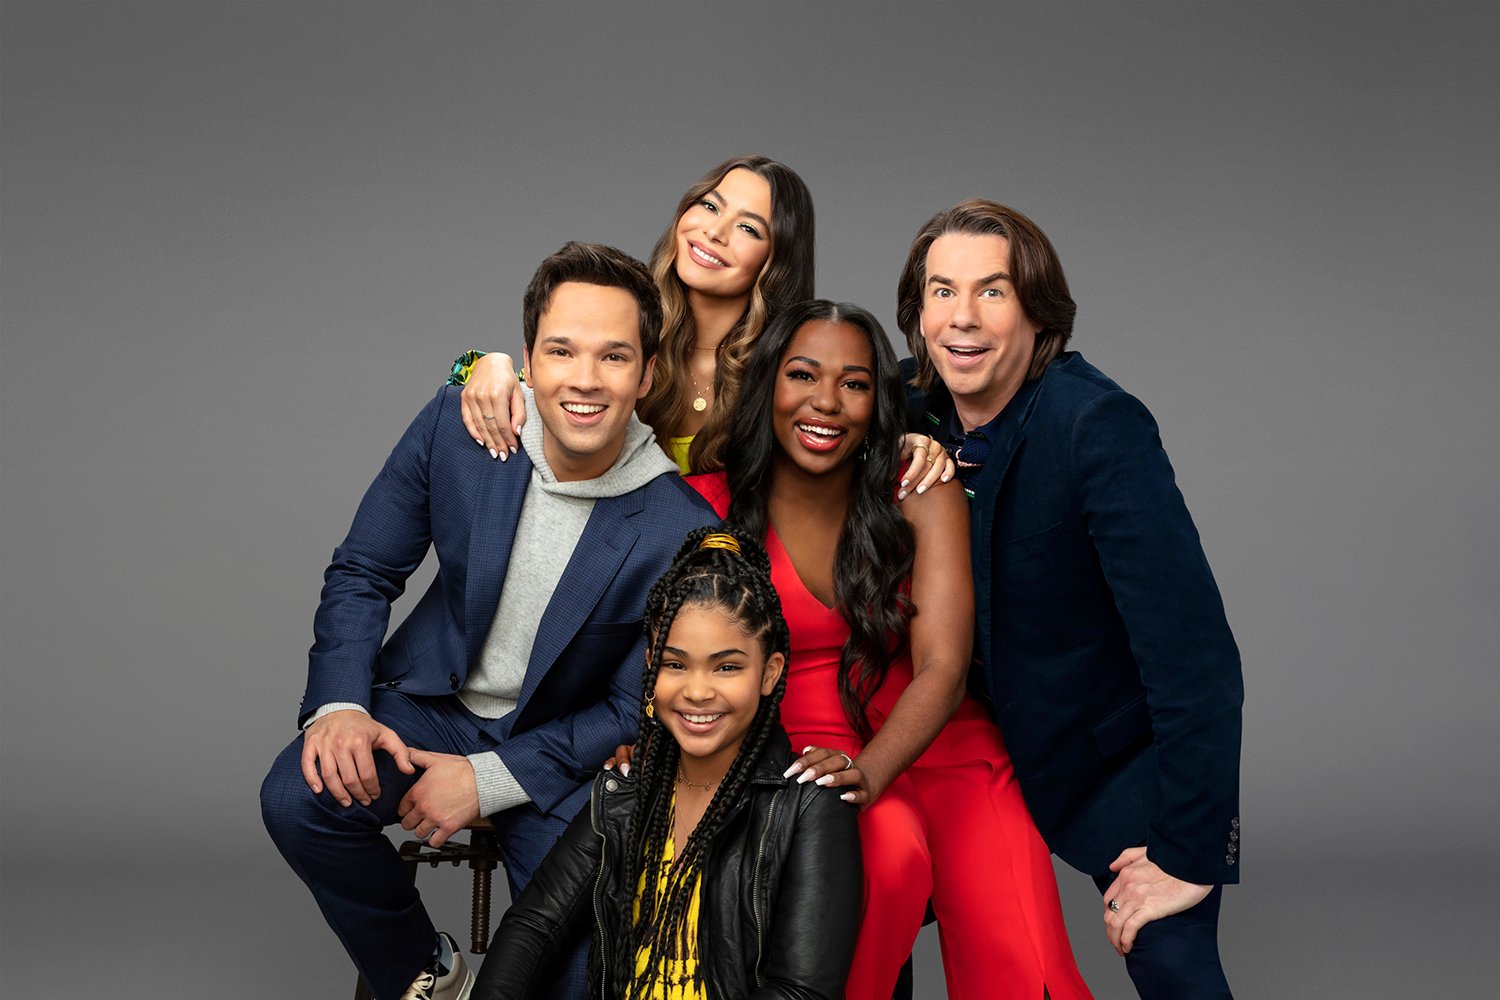 iCarly cast members Jaidyn Triplett as Millicent, Jerry Trainor as Spencer, Miranda Cosgrove as Carly, Nathan Kress as Freddie, Laci Mosley as Harper in season 2 episodes